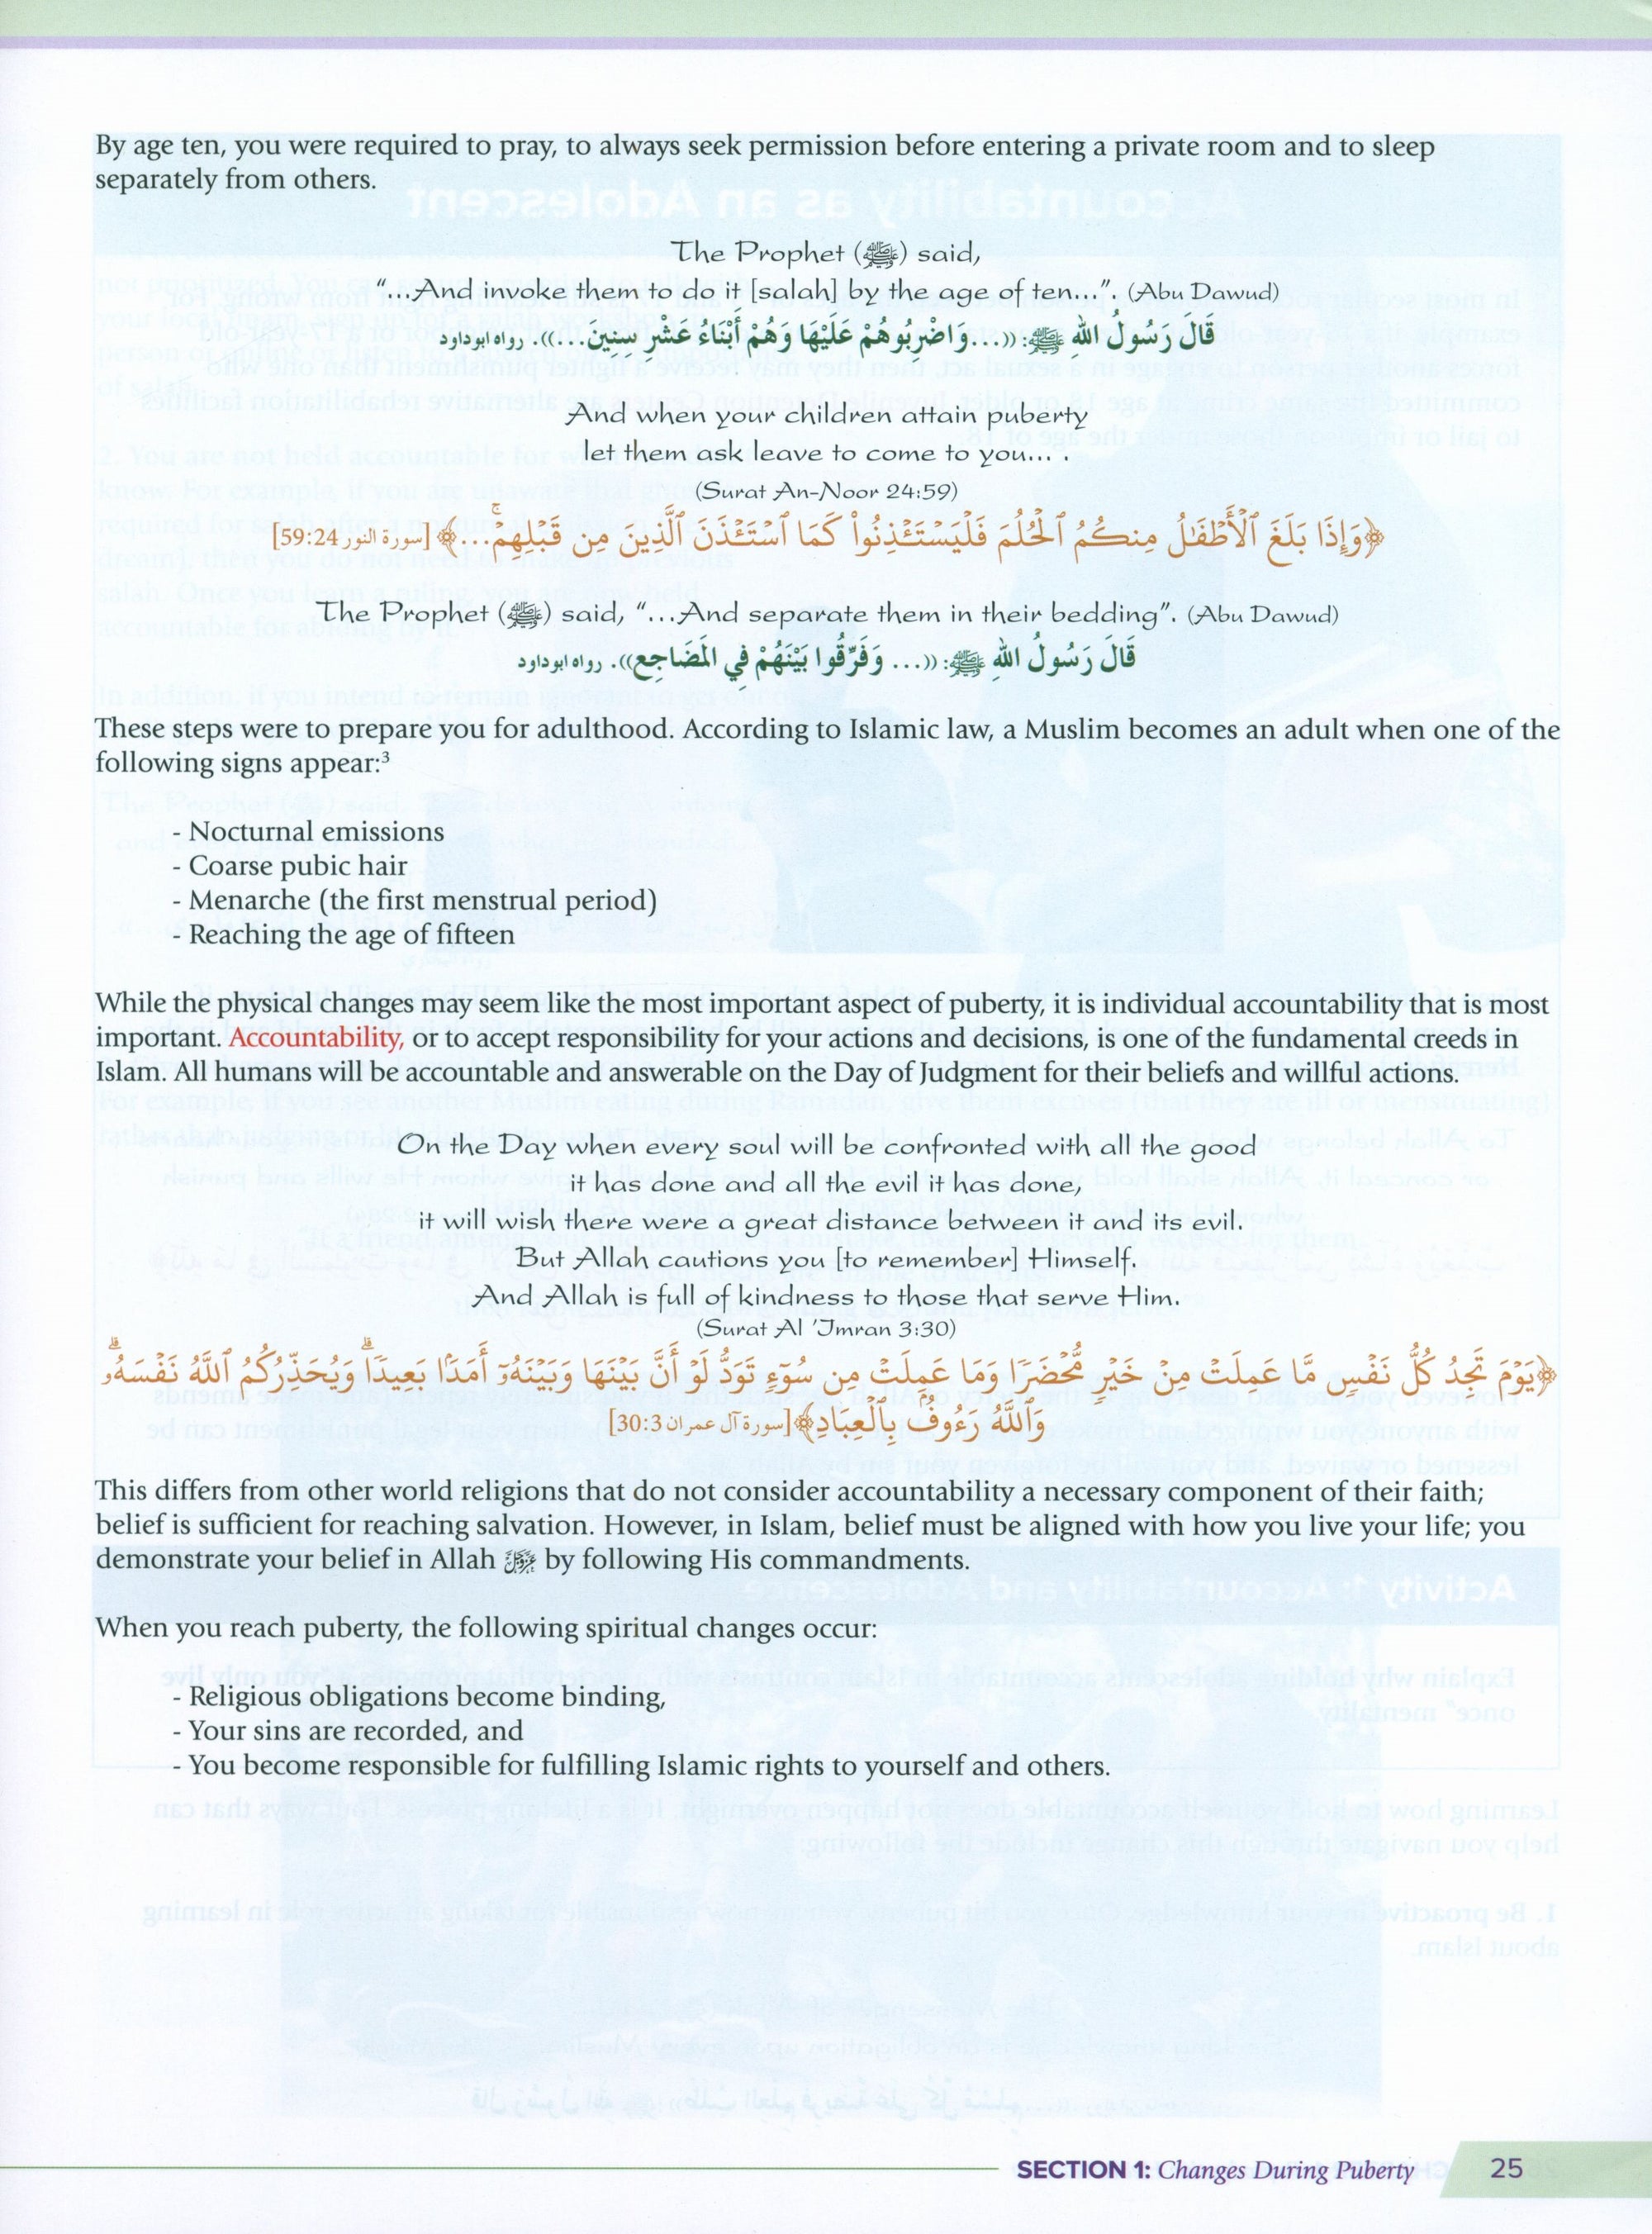 Health and Wellness (From an Islamic  Perspective) Leve 5